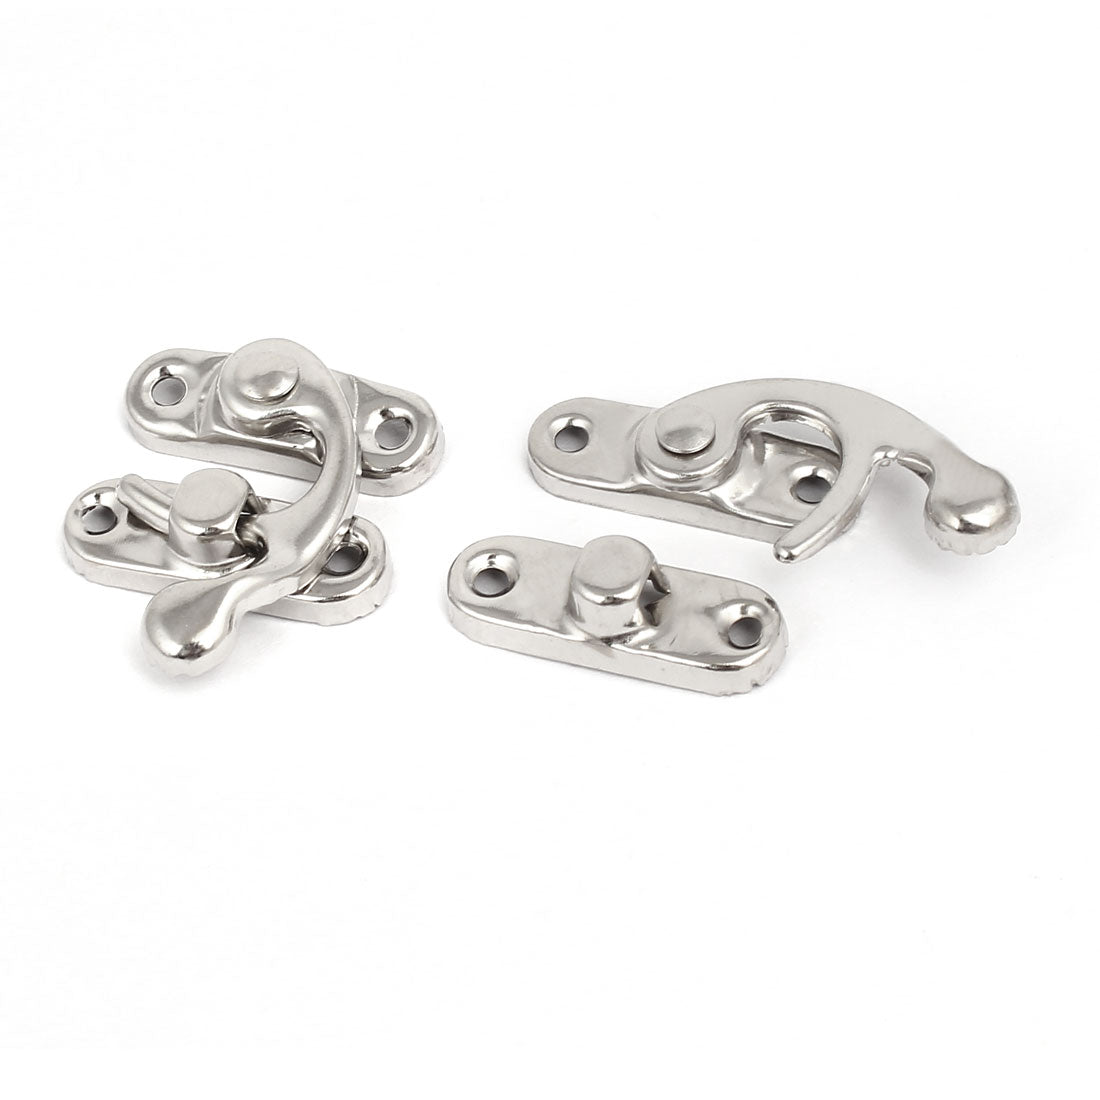 uxcell Uxcell Jewelry Box Right Swing Arm Clasp Latches Catch Toggle Hasp Silver Tone 10PCS